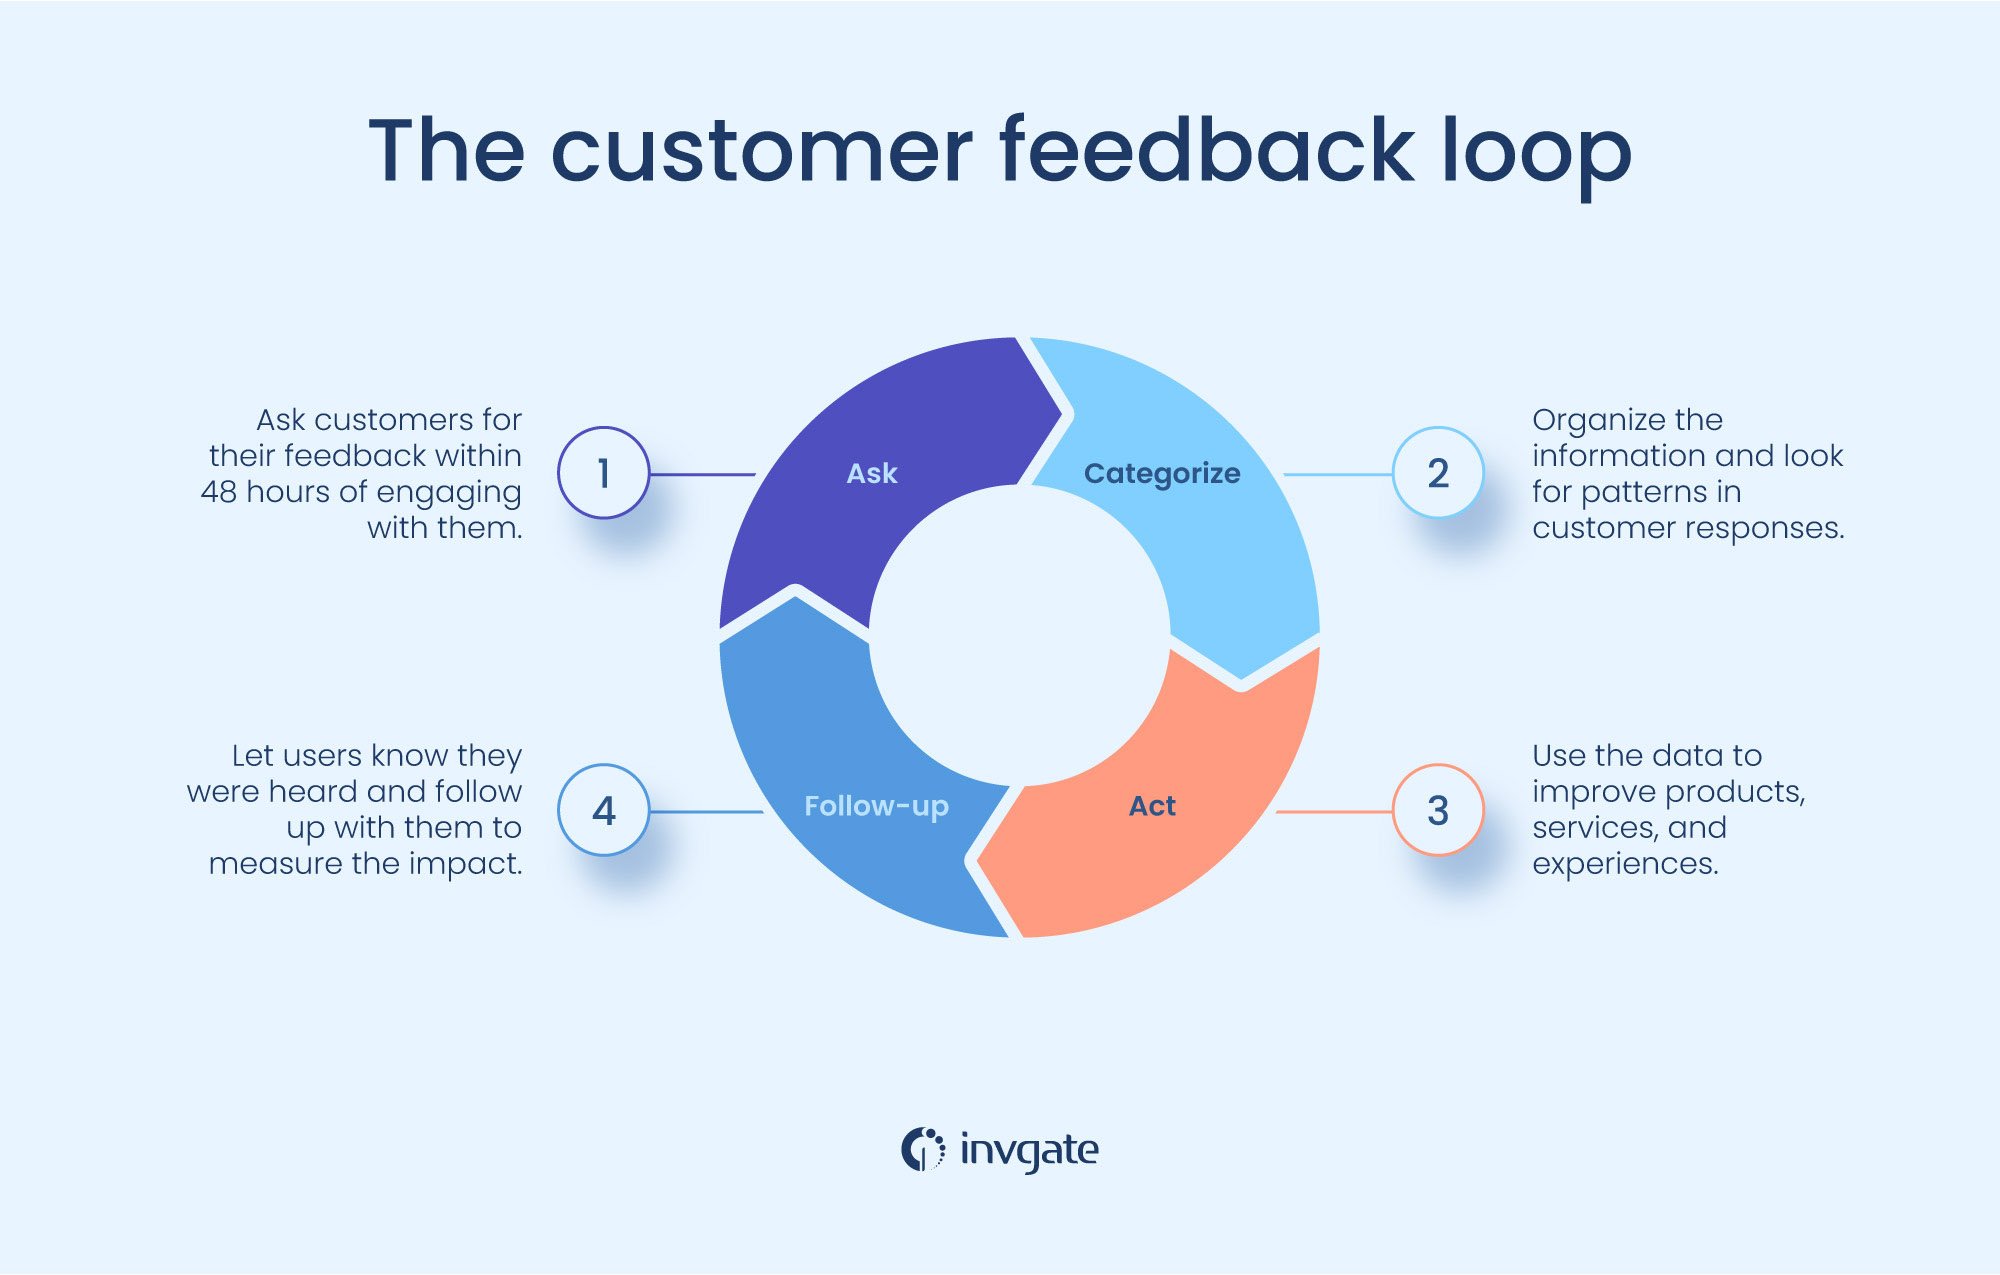 The customer feedback loop describes the virtuous cycle your organization can implement to constantly collect, analyze, and implement feedback.